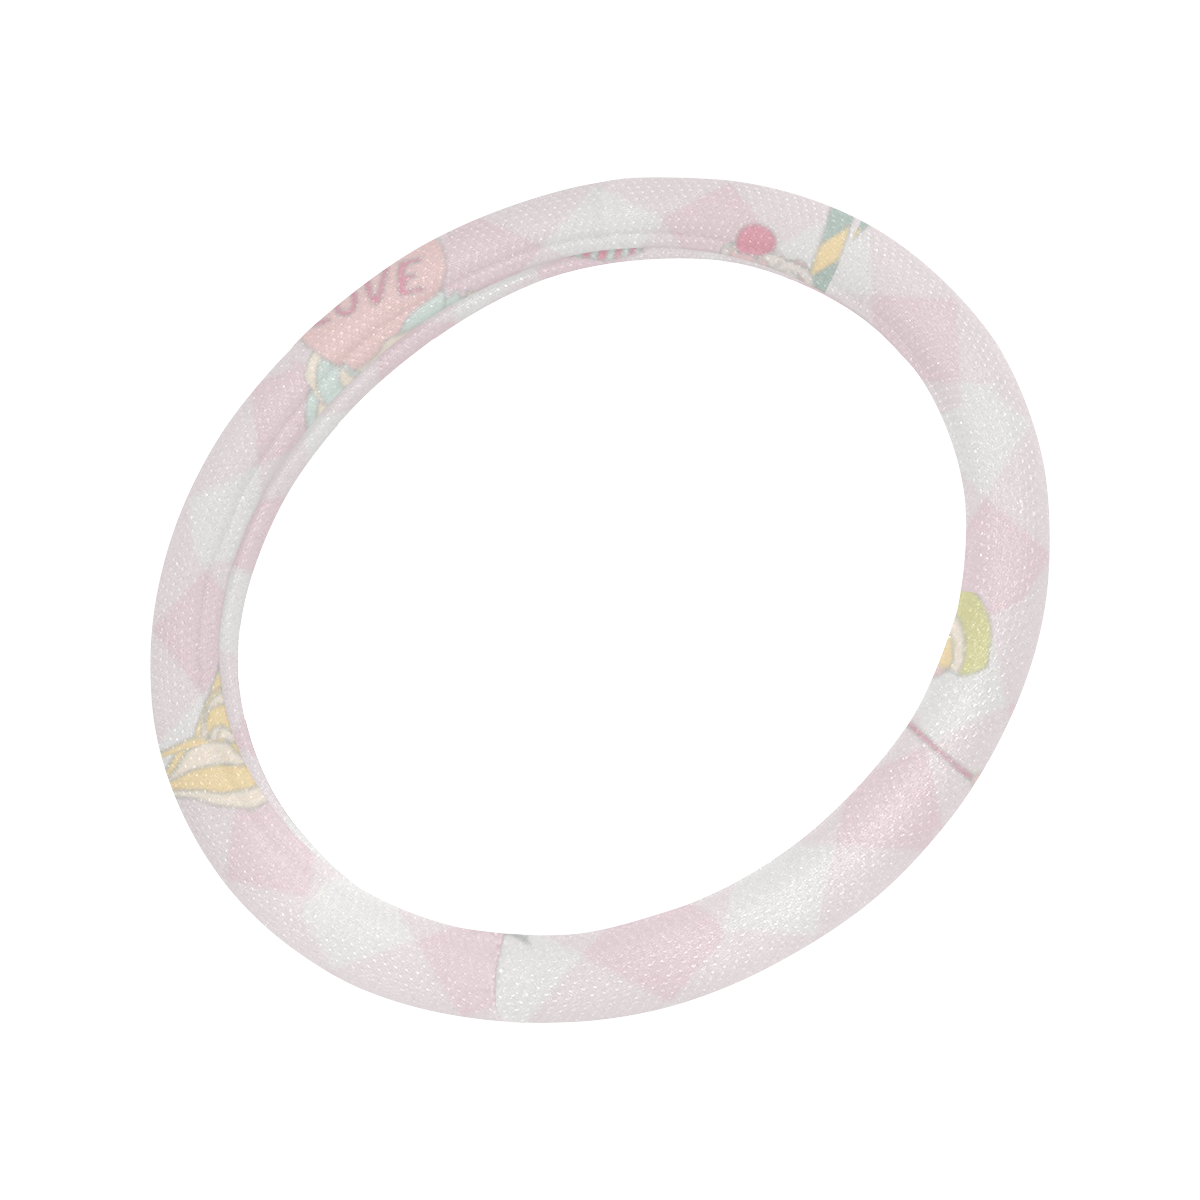 Cupcakes Steering Wheel Cover with Anti-Slip Insert